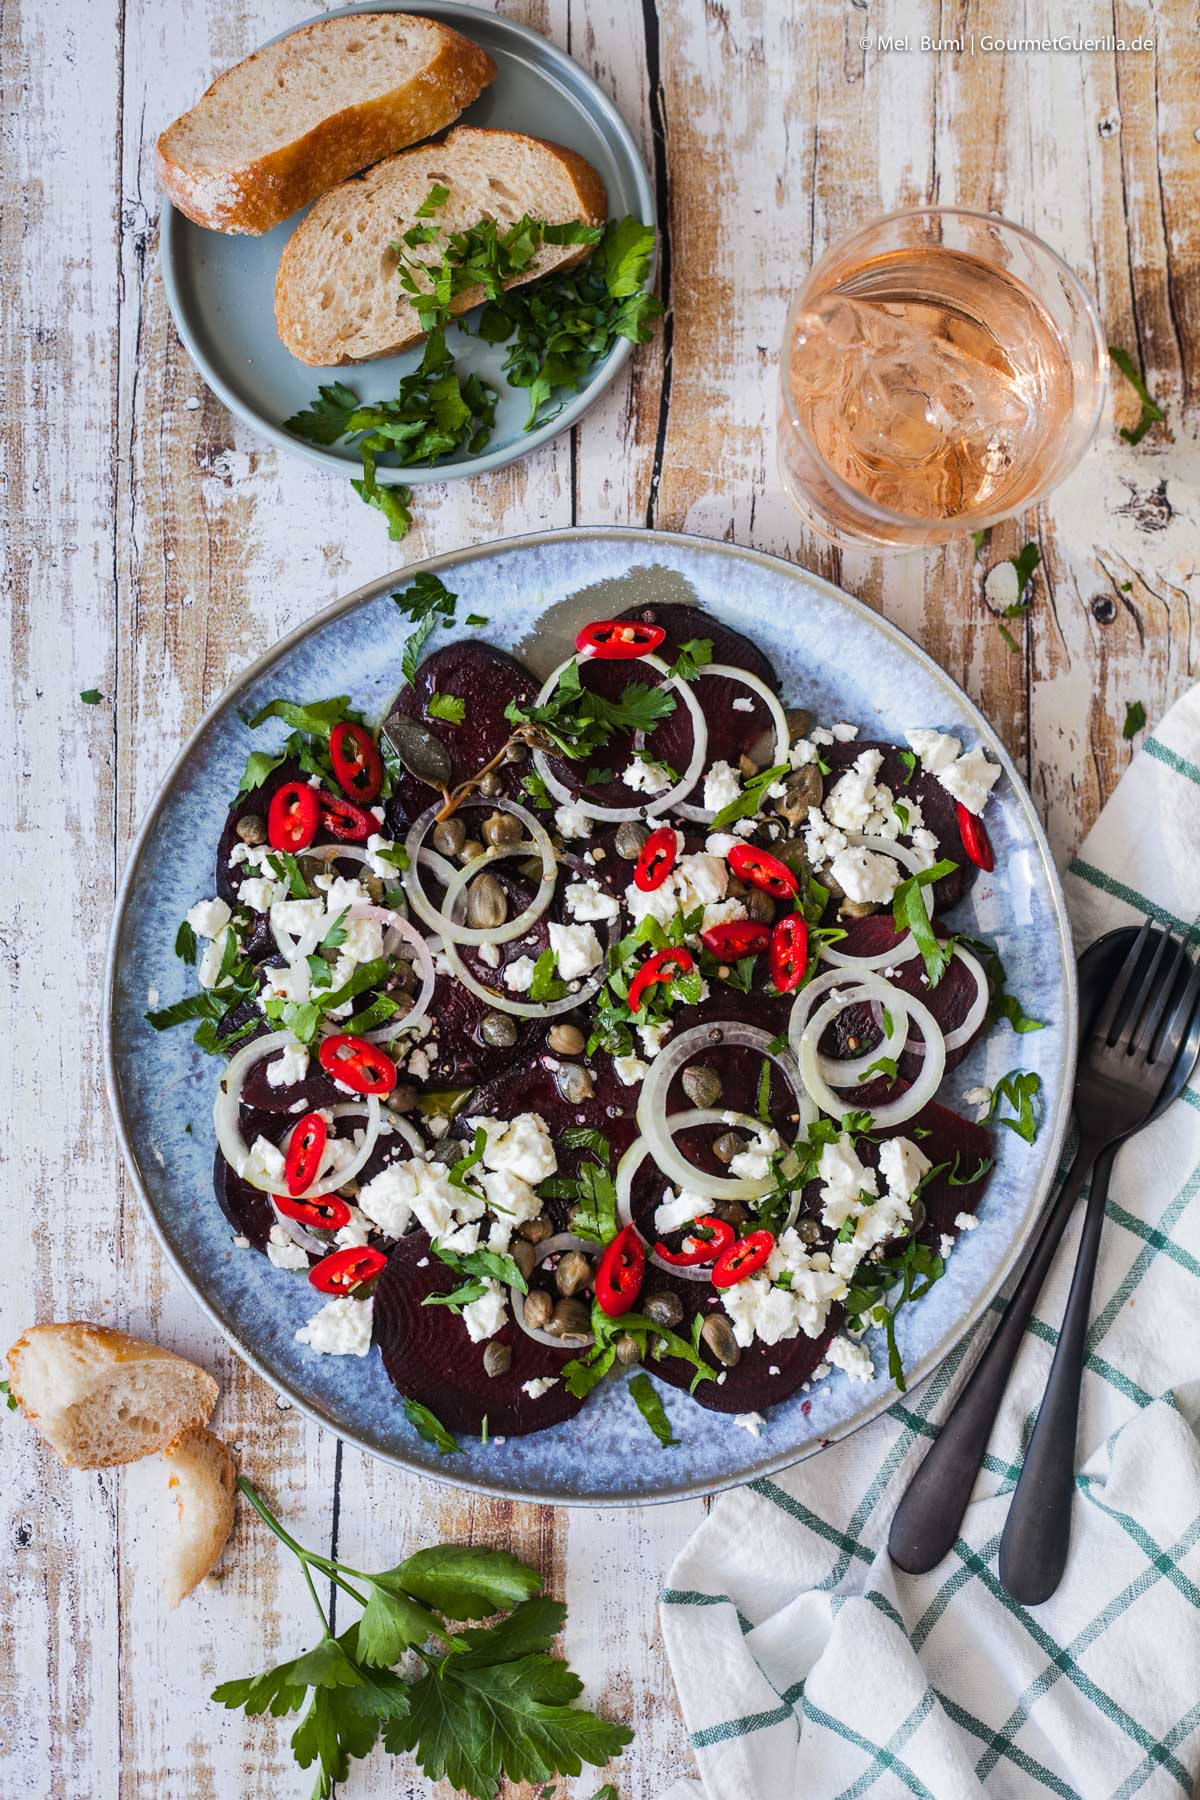 Beetroot salad with capers and feta cheese - in 5 minutes on the table | GourmetGuerilla.com